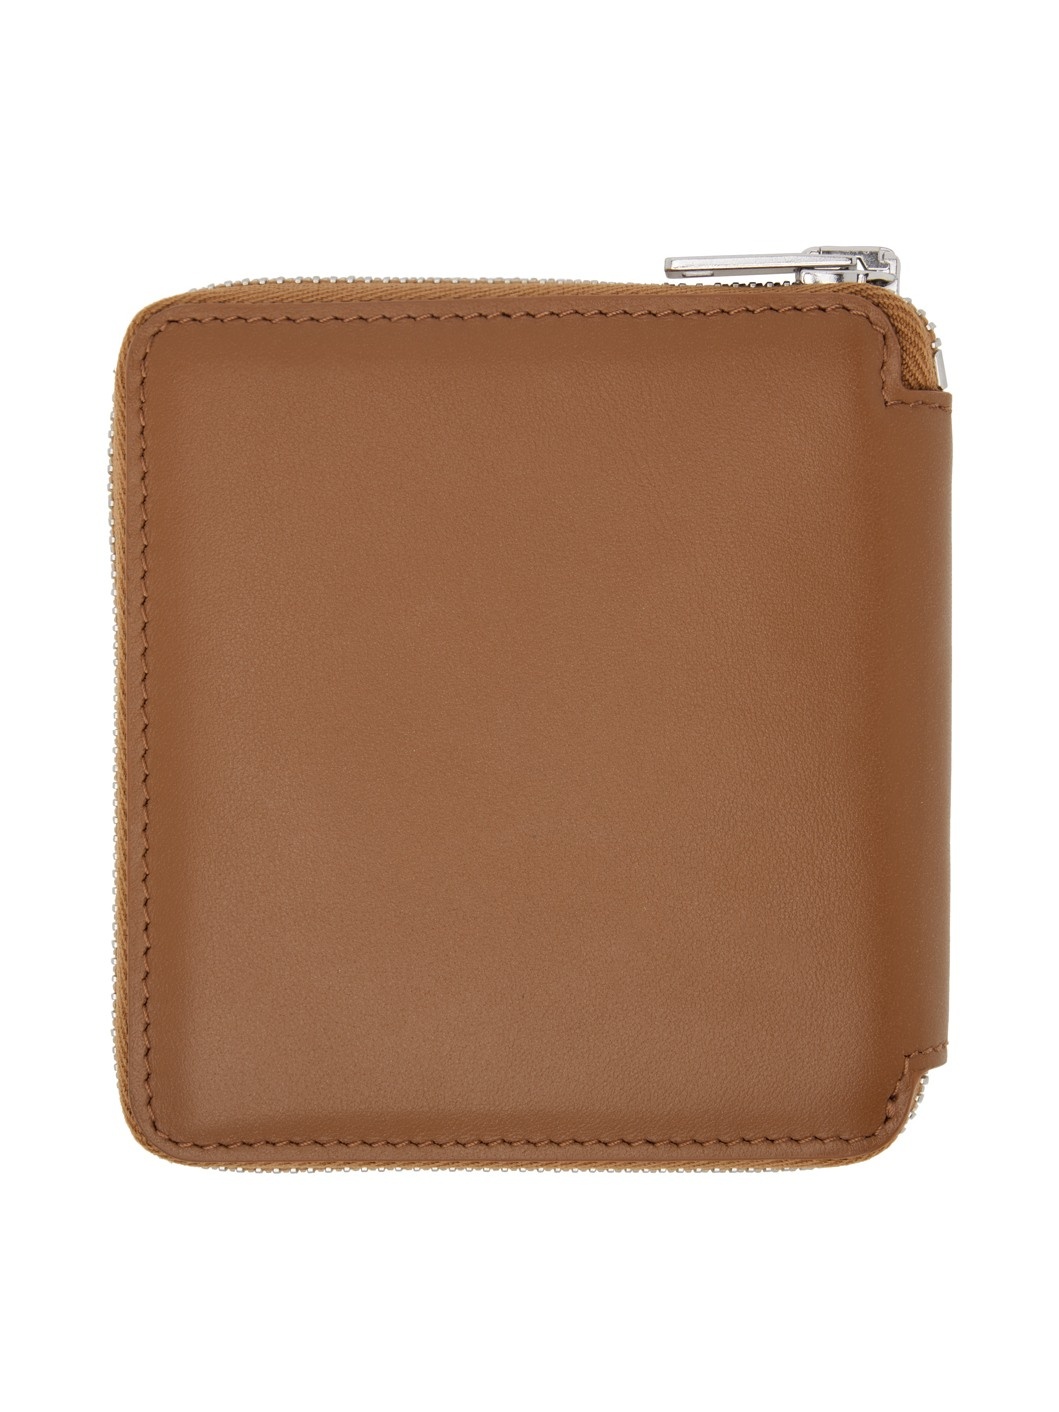 Brown Square Zipped Wallet - 2